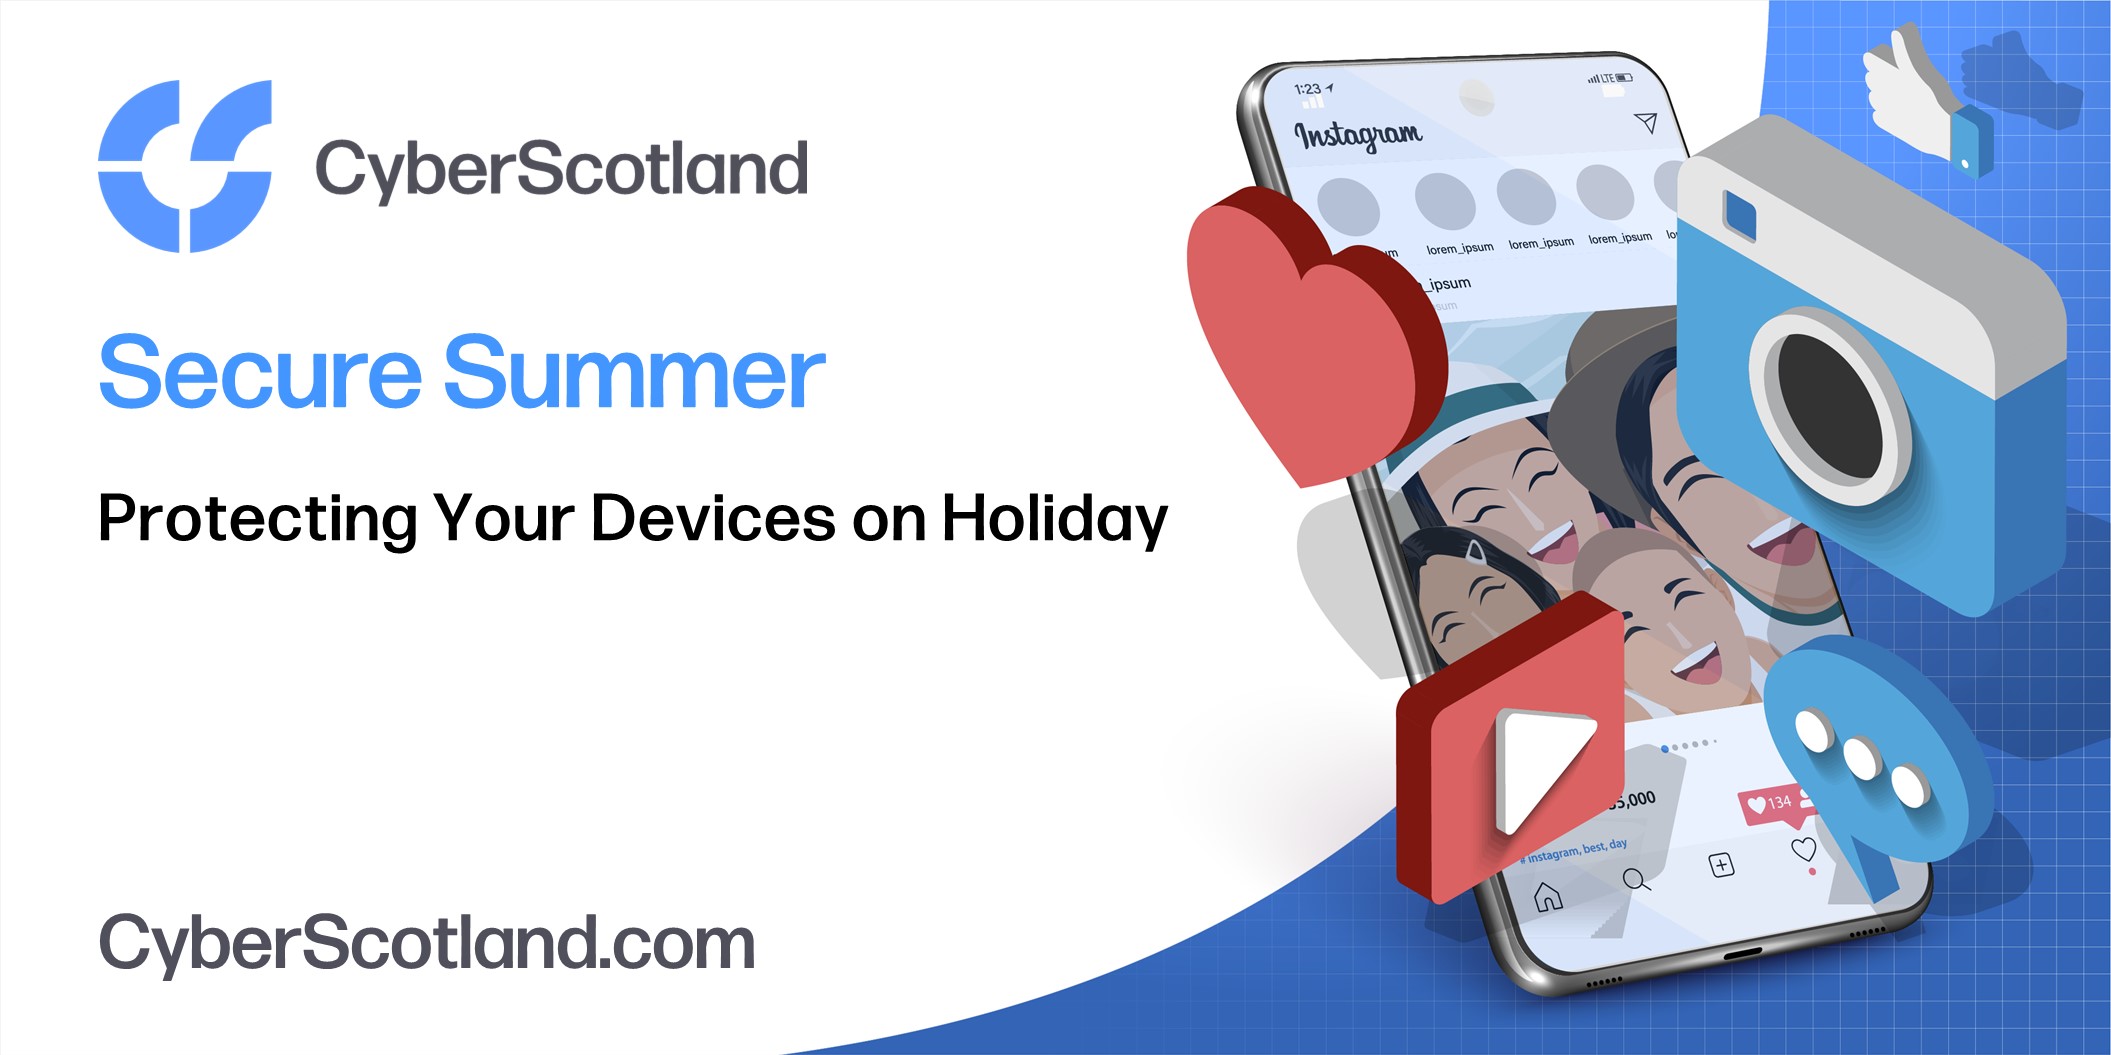 Protecting Your Devices on Holiday: Best practices for securing your devices while traveling